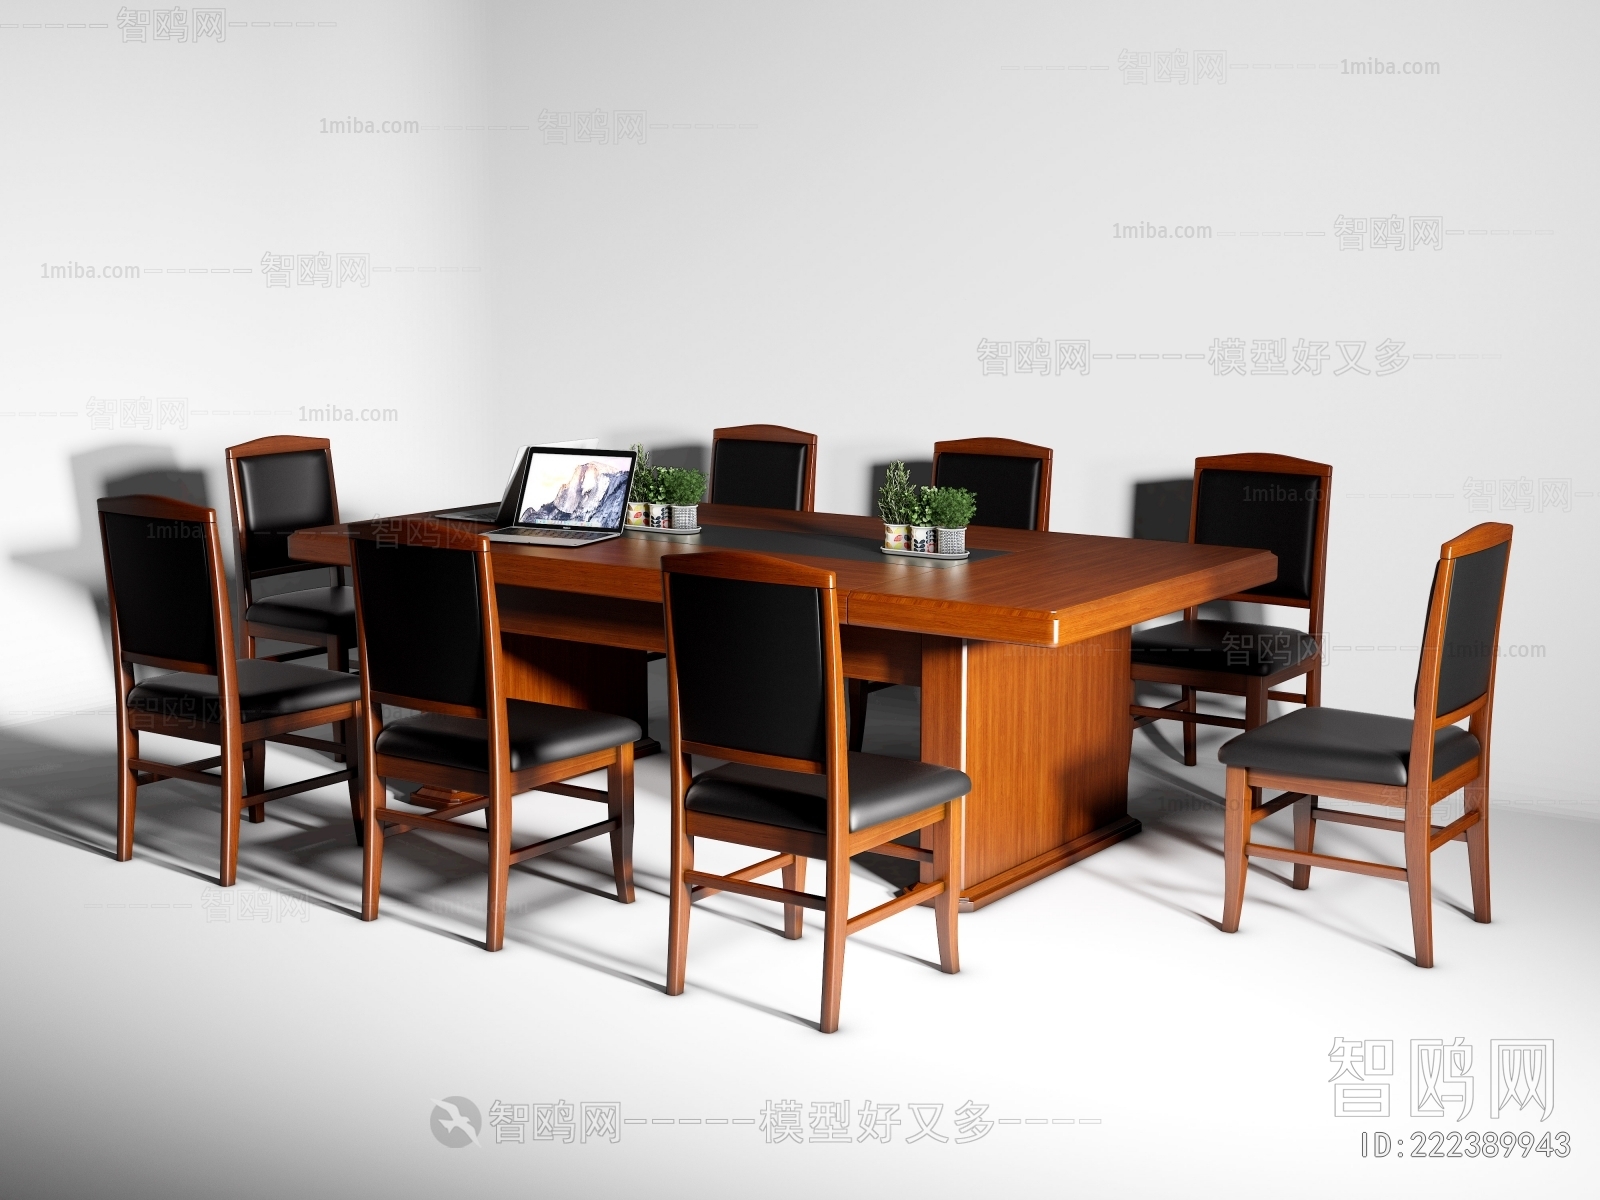 New Classical Style Conference Table